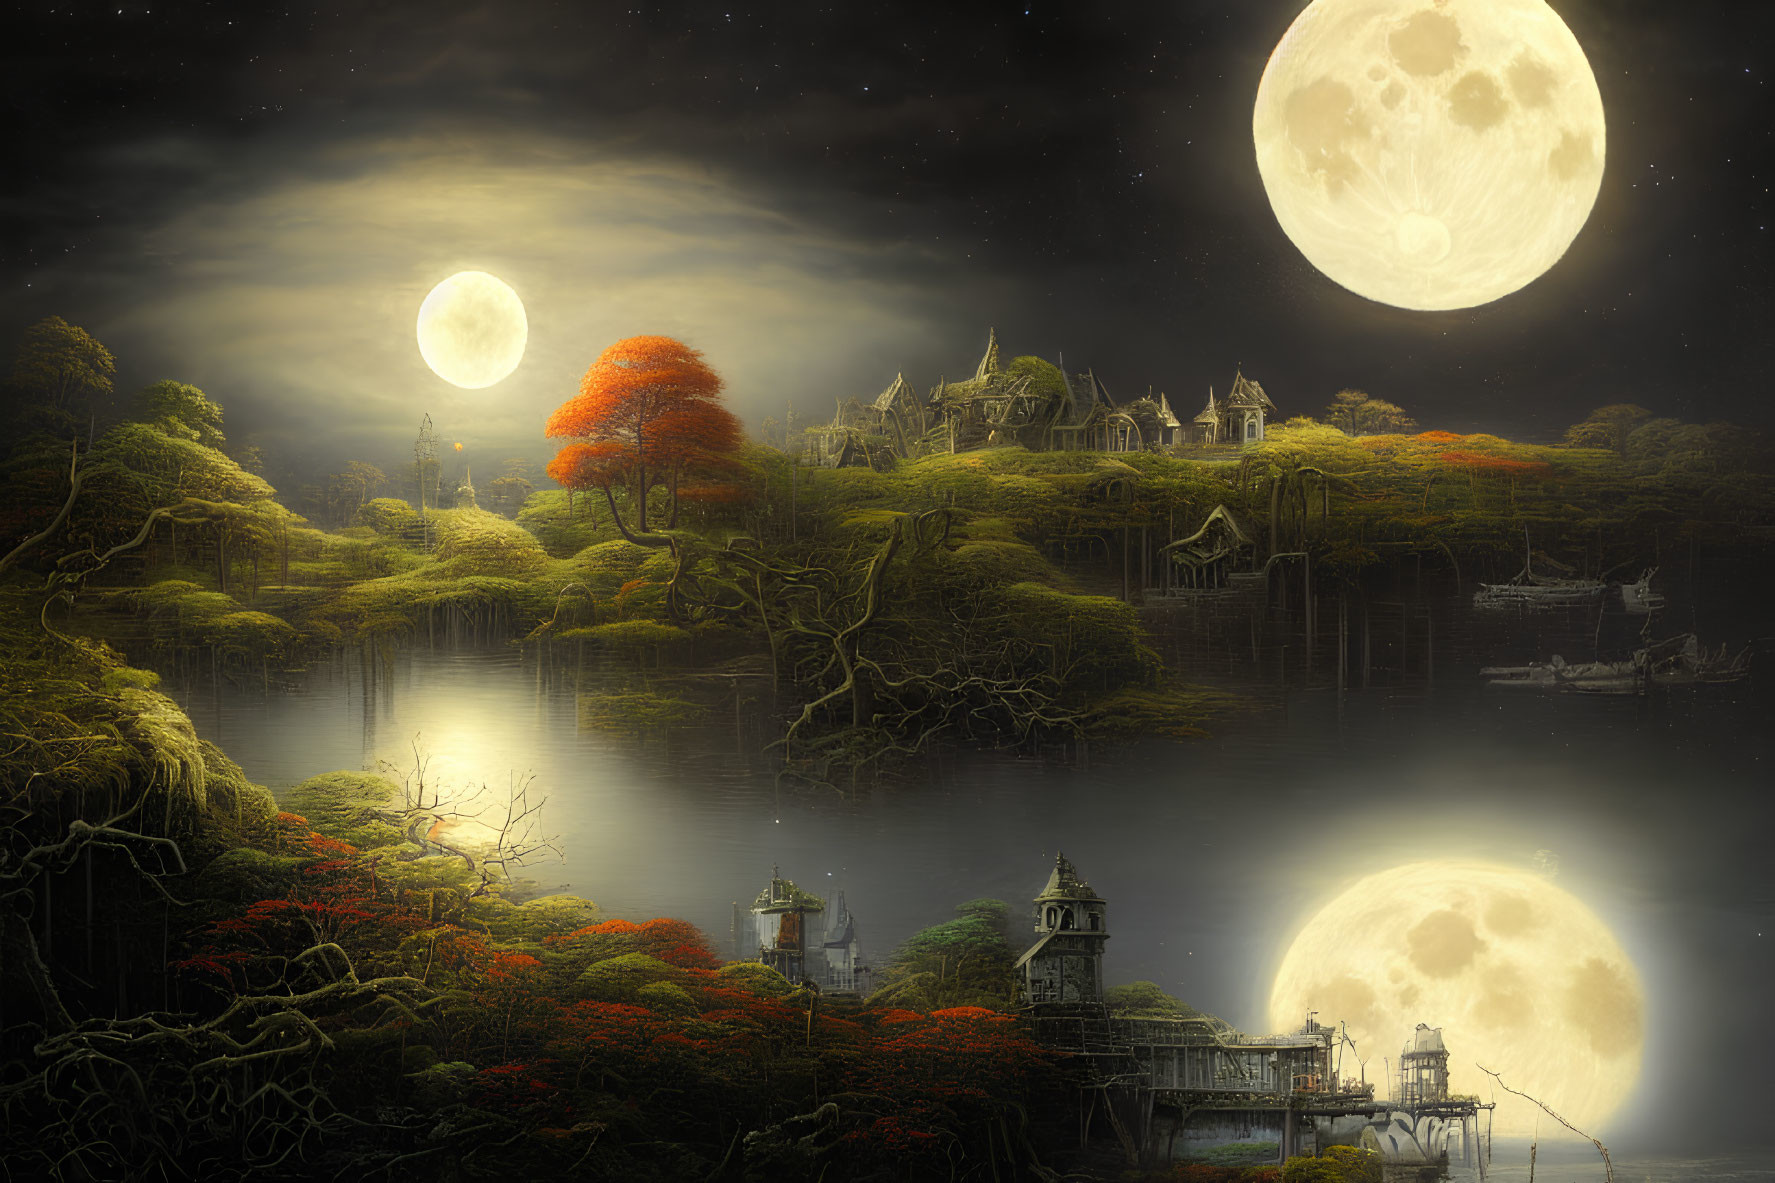 Tranquil night landscape with three moons, castle, lake reflections, and sailing boat